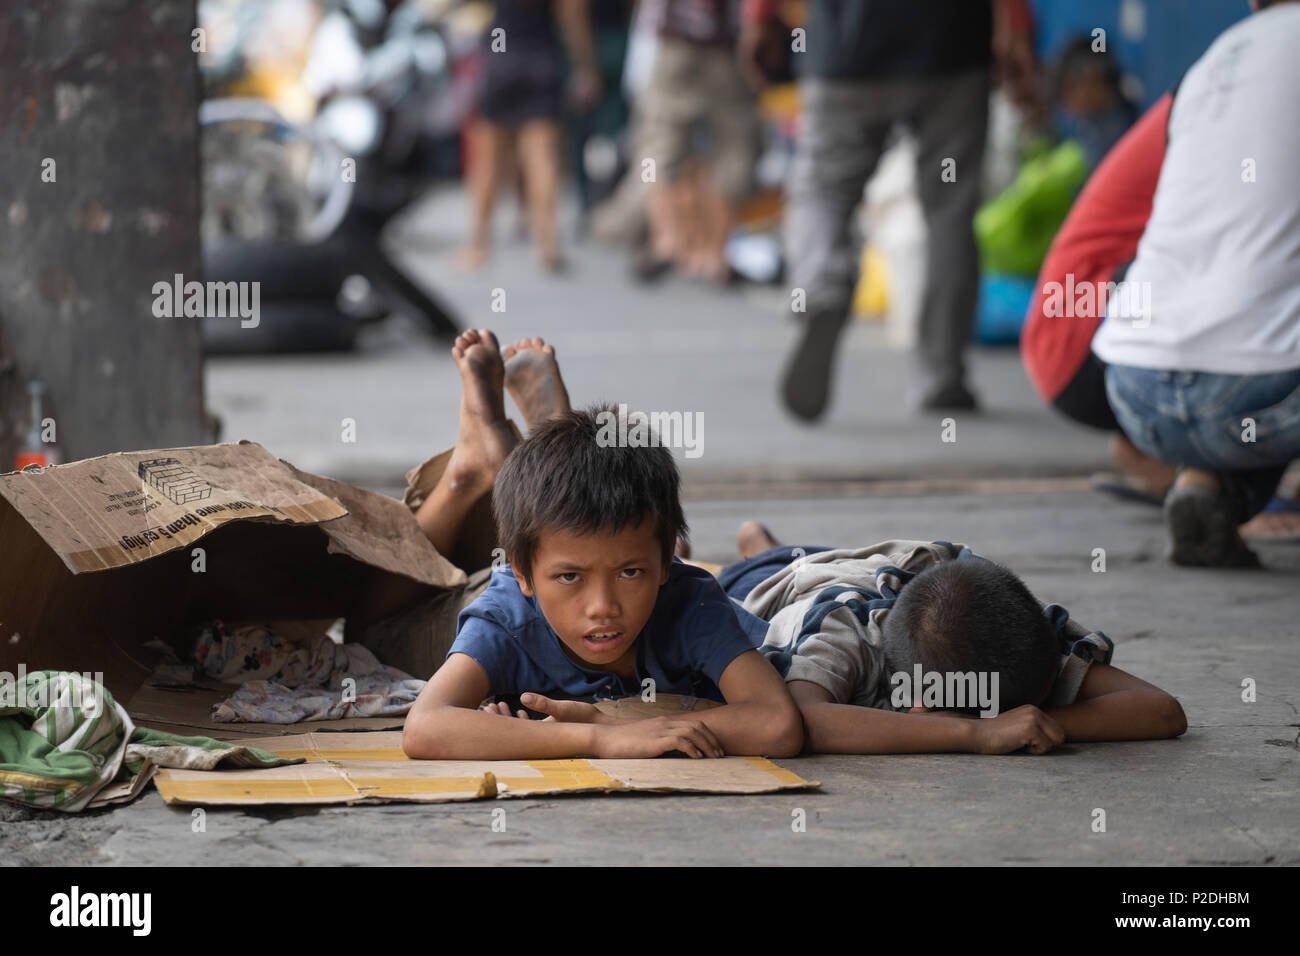 Street children in Cebu City,Philippines on the sidewalk lying on cardboard which they use as bedding when sleeping. Stock Photo